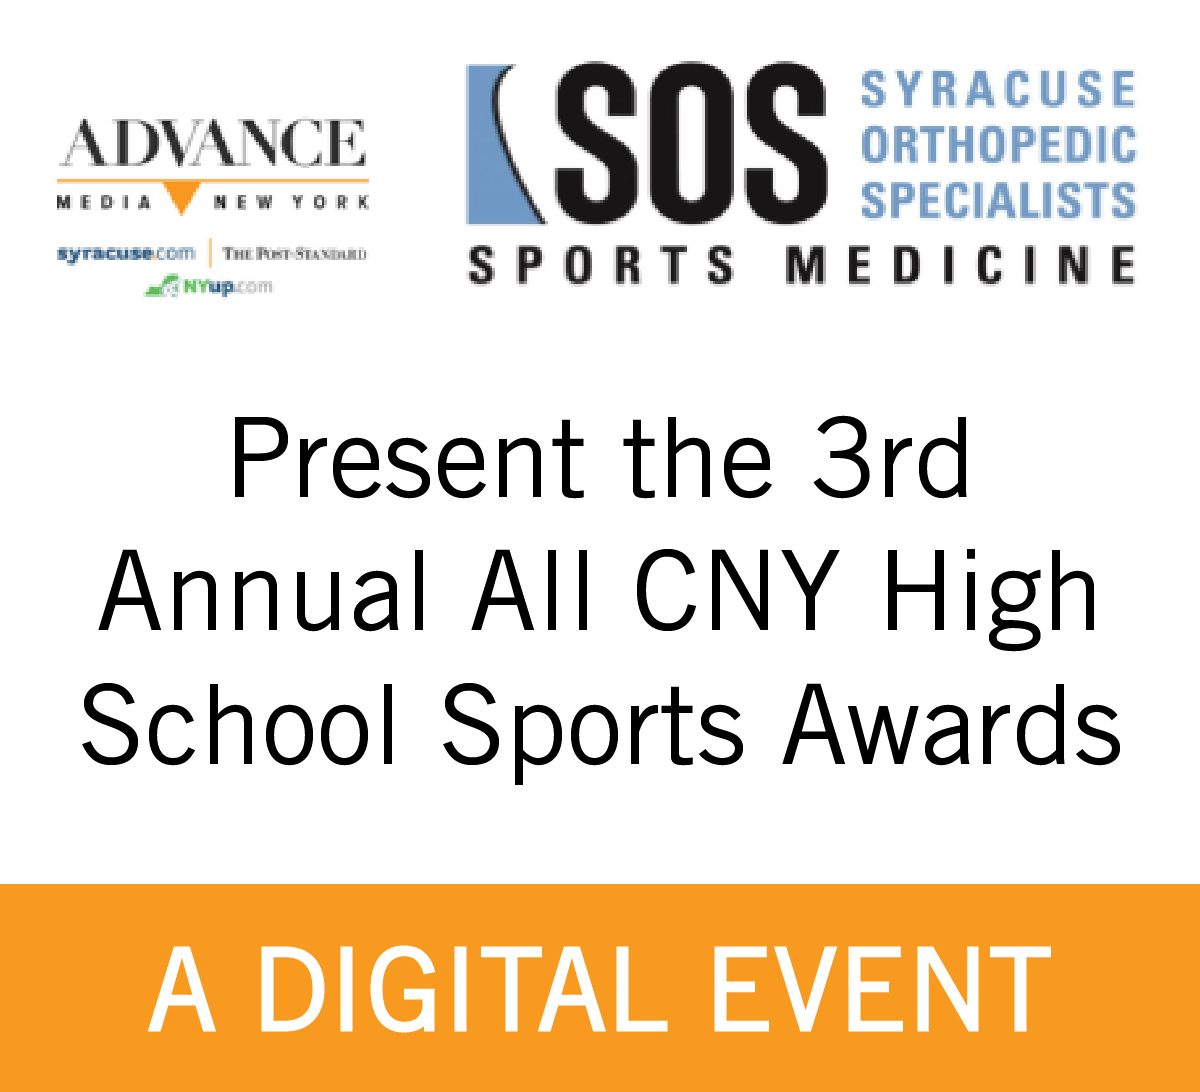 The Post-Standard & Syracuse Orthopedic Specialists present the 3rd Annual All CNY High School Sports Awards